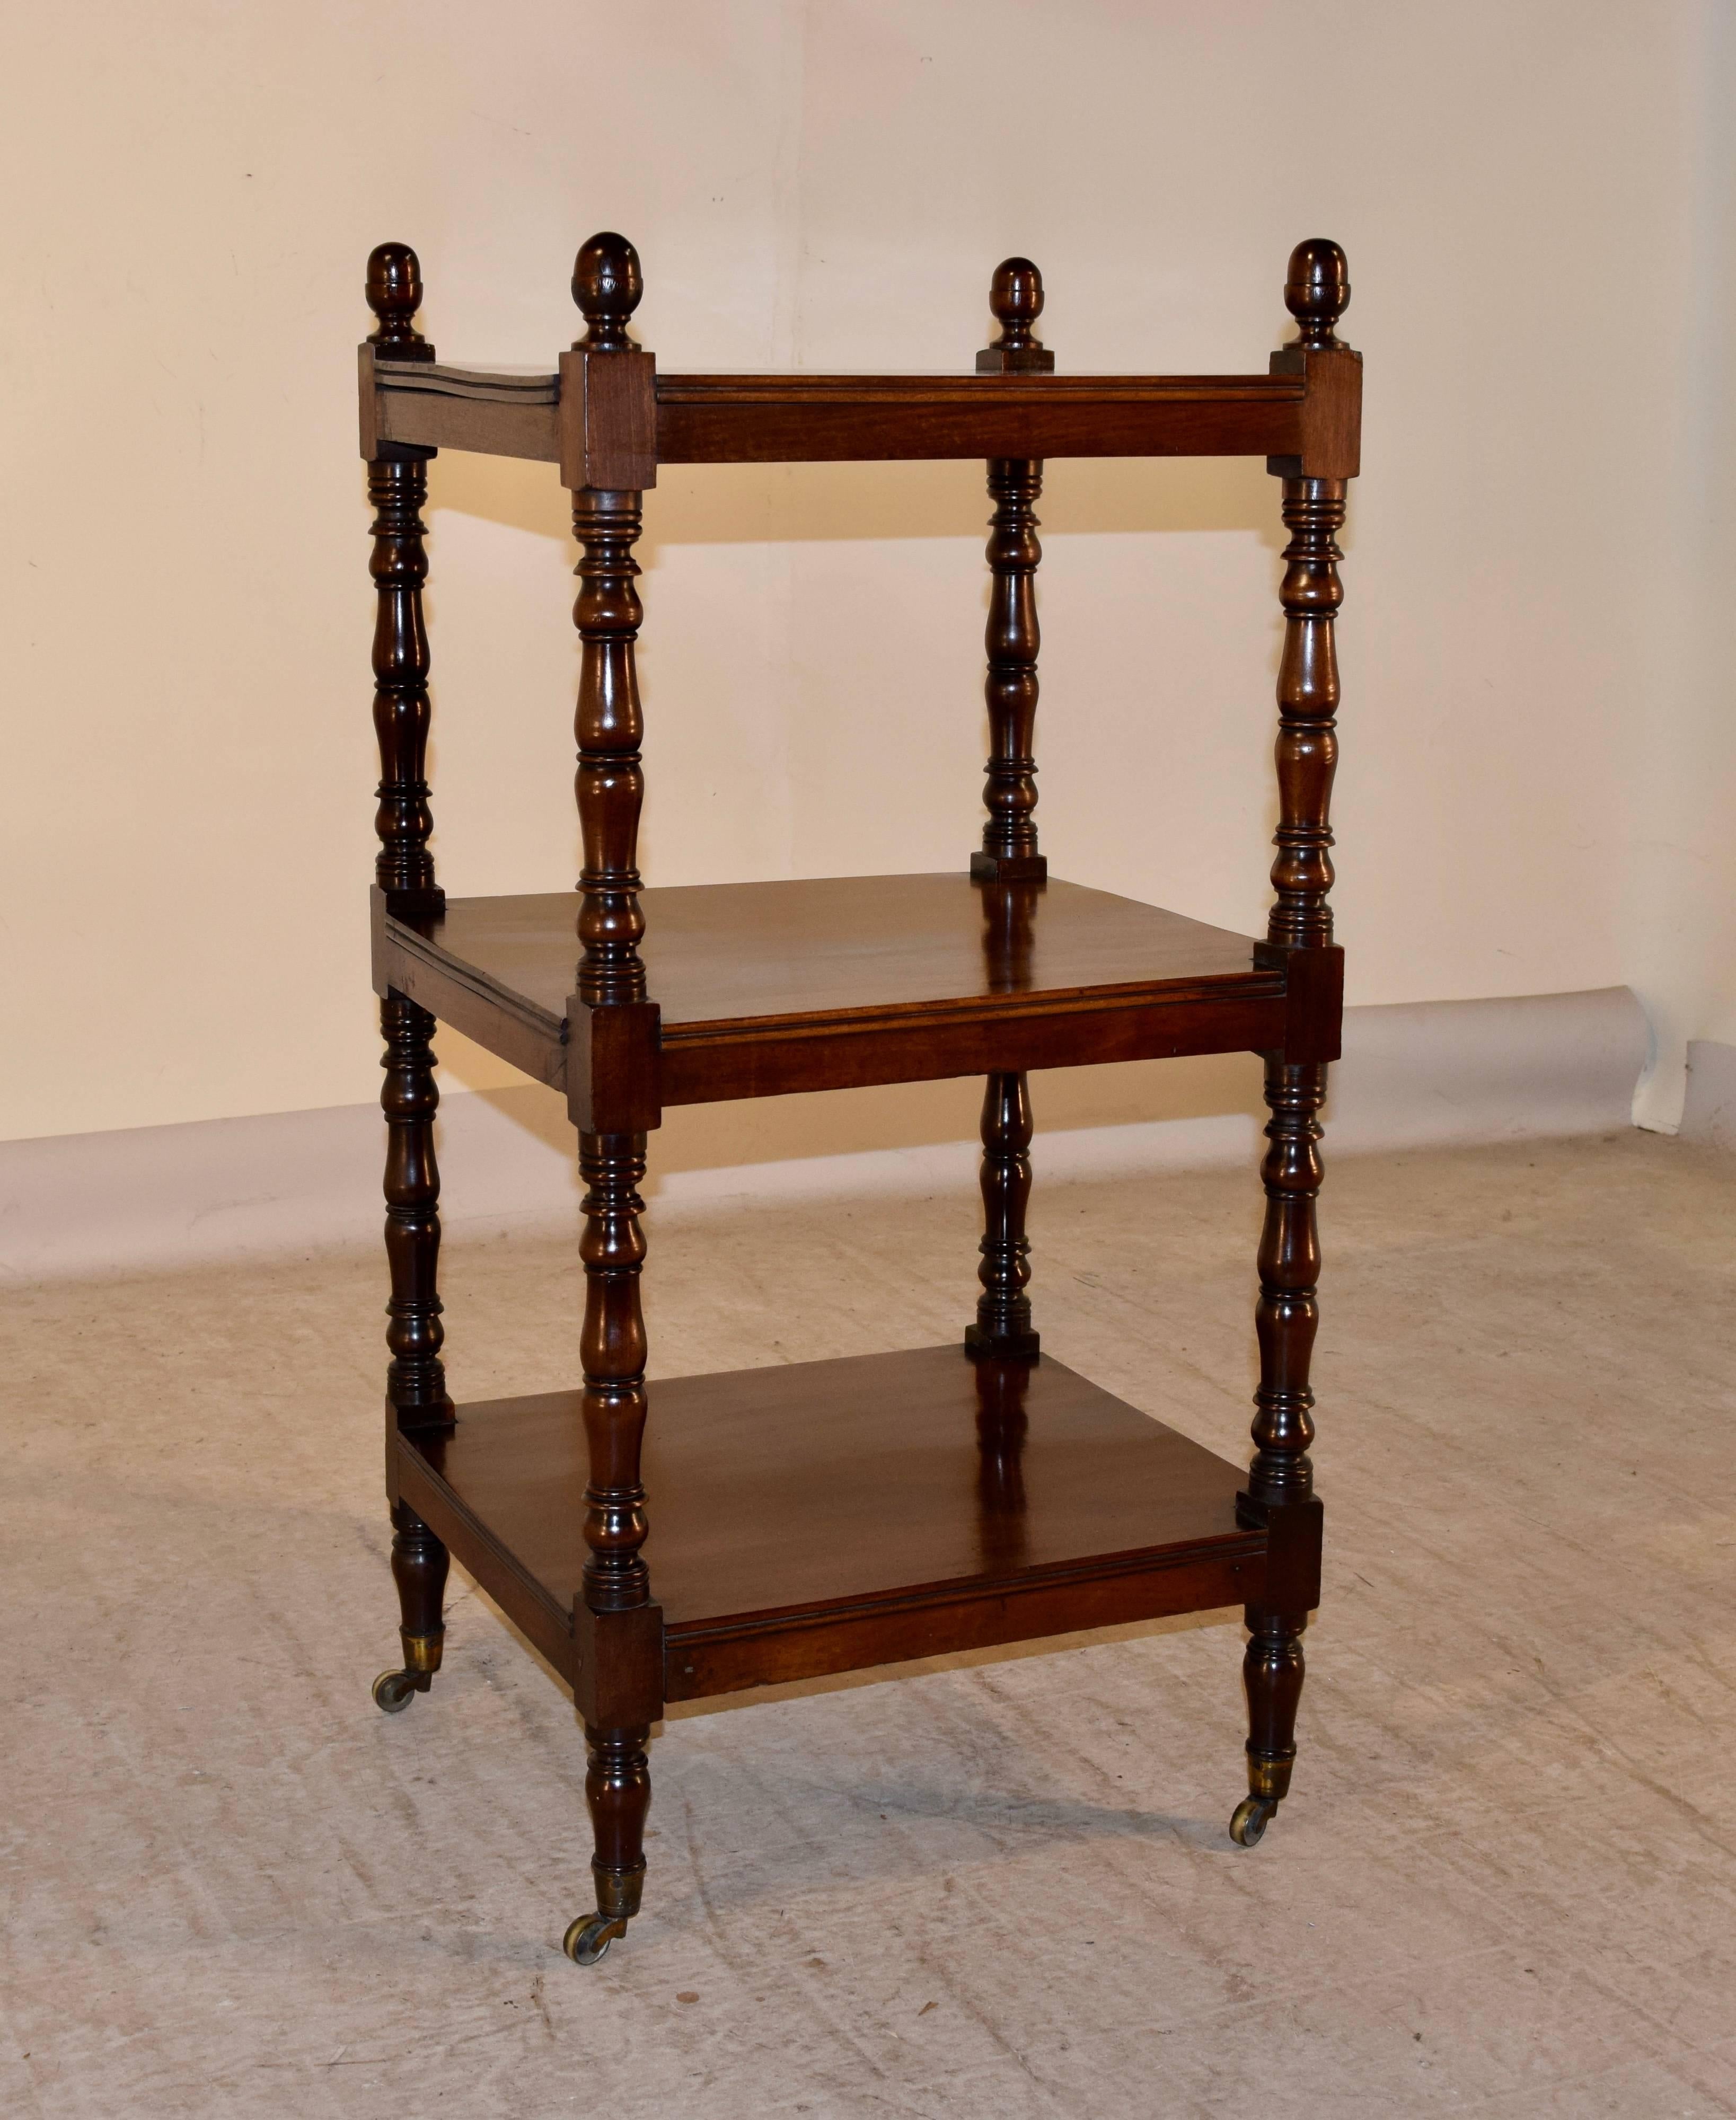 19th century English Mahogany dumbwaiter with lovely turned finials in the shape of acorns. Three shelves with reeded edges separated by hand-turned shelf supports. Resting on original casters.